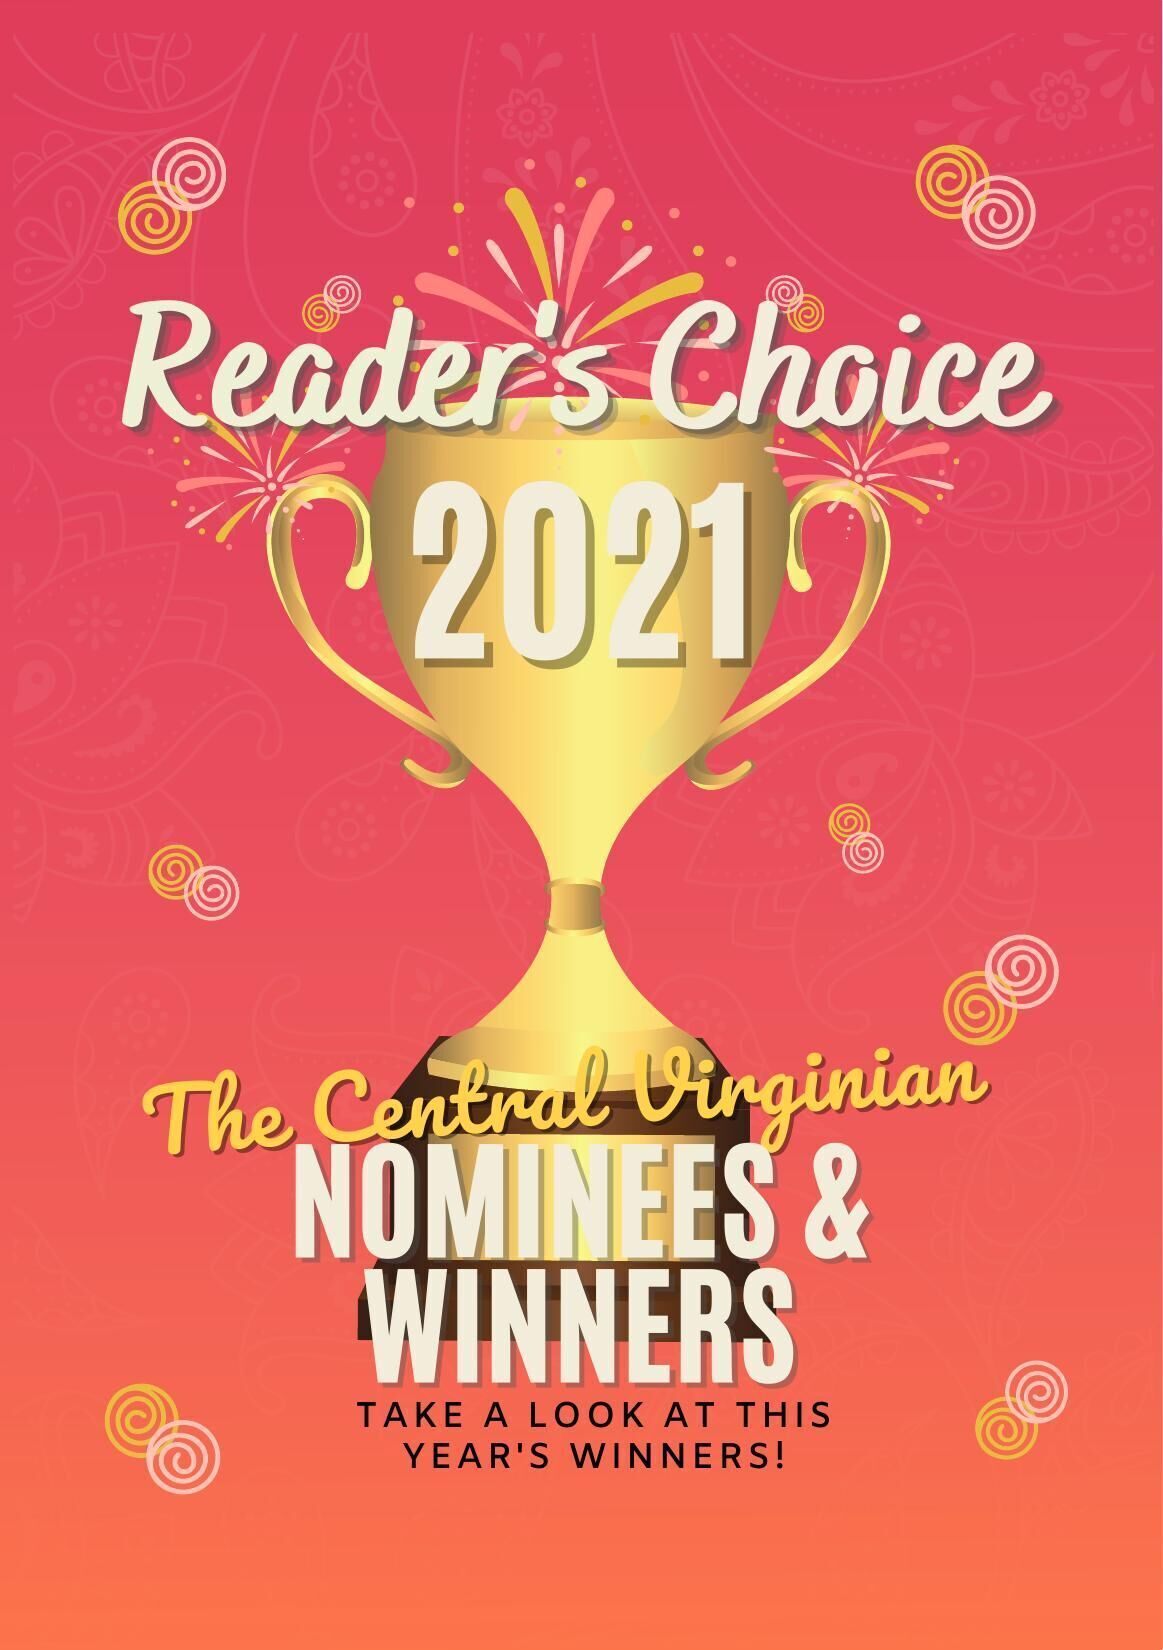 The votes are in: Here are the winners of the 2021 Readers' Choice